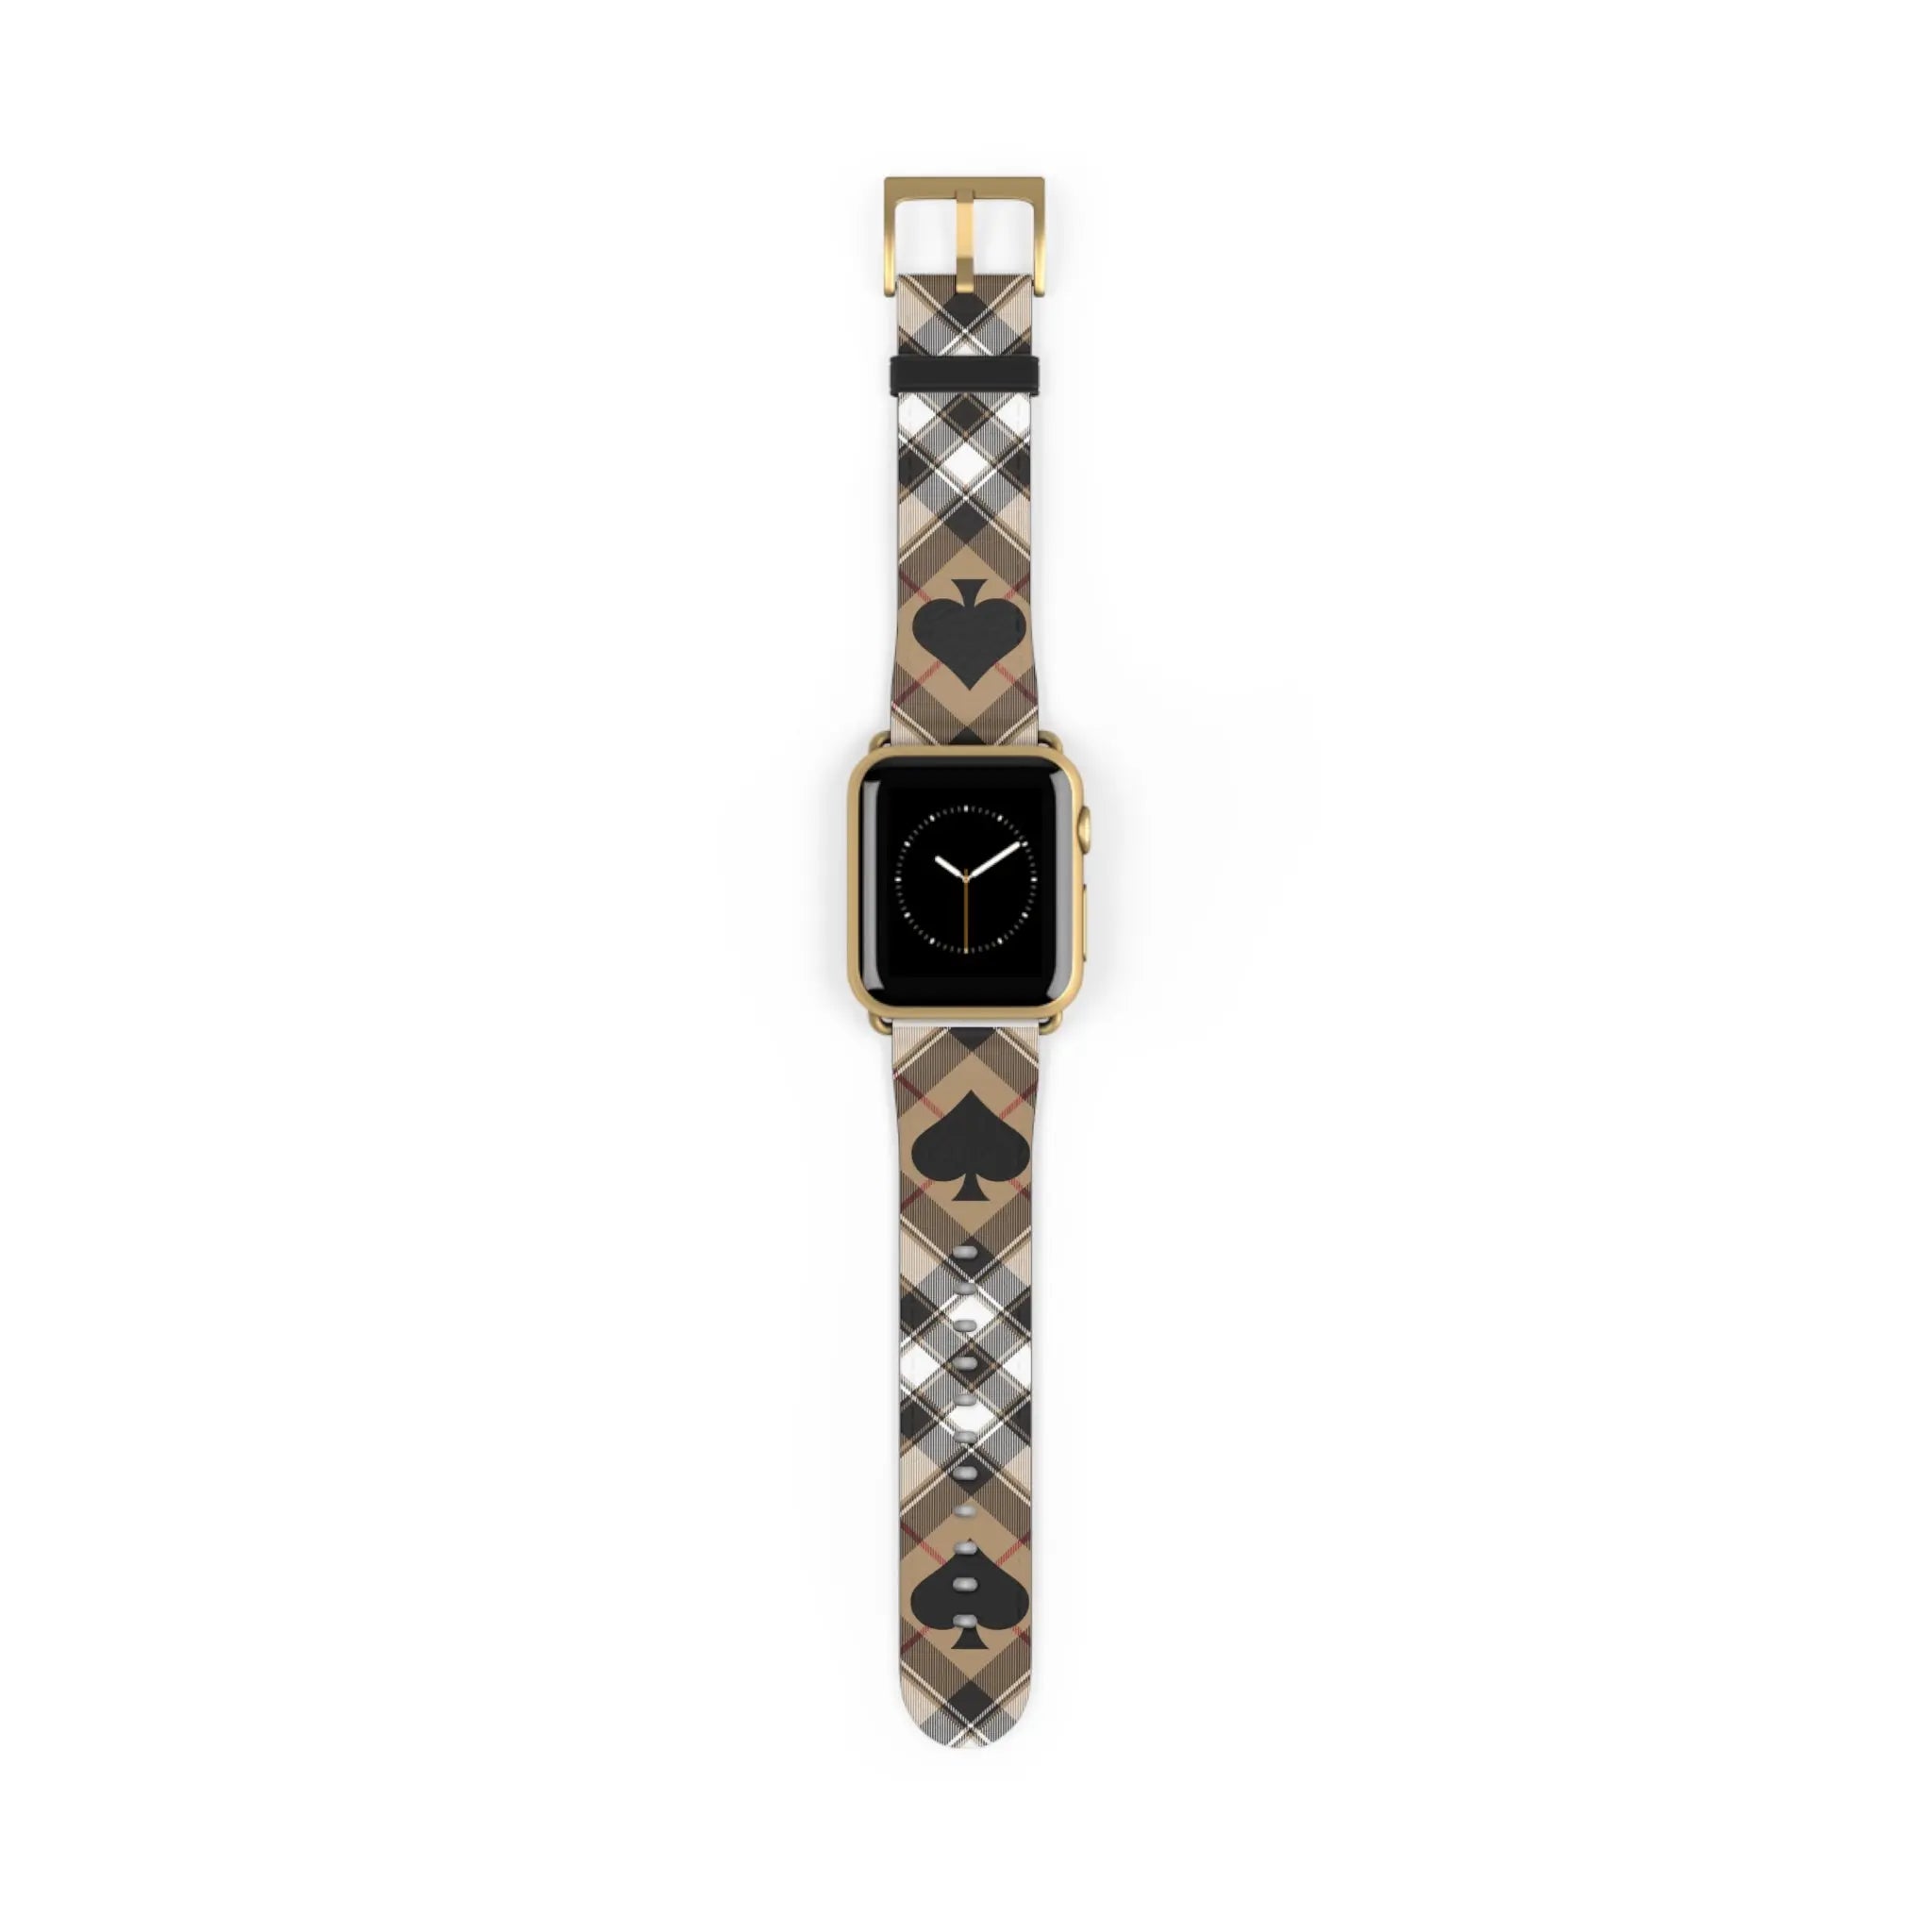  Abby Beige Ace of Spades Apple Watch Band Accessories38-41mmGoldMatte